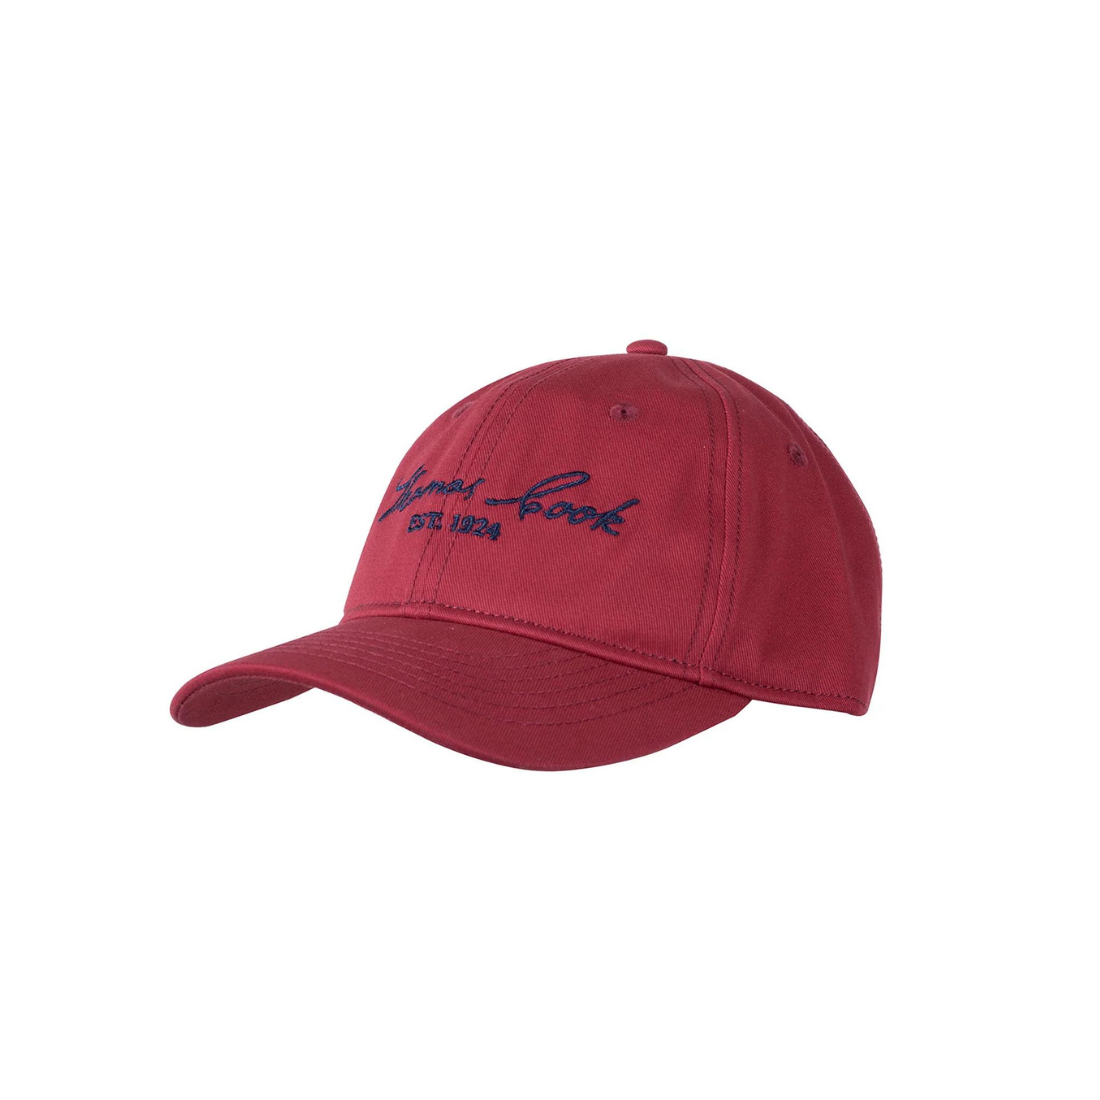 Horseman Cap OS Red Mens Hats, Scarves, Beanies by Thomas Cook | The Bloke Shop